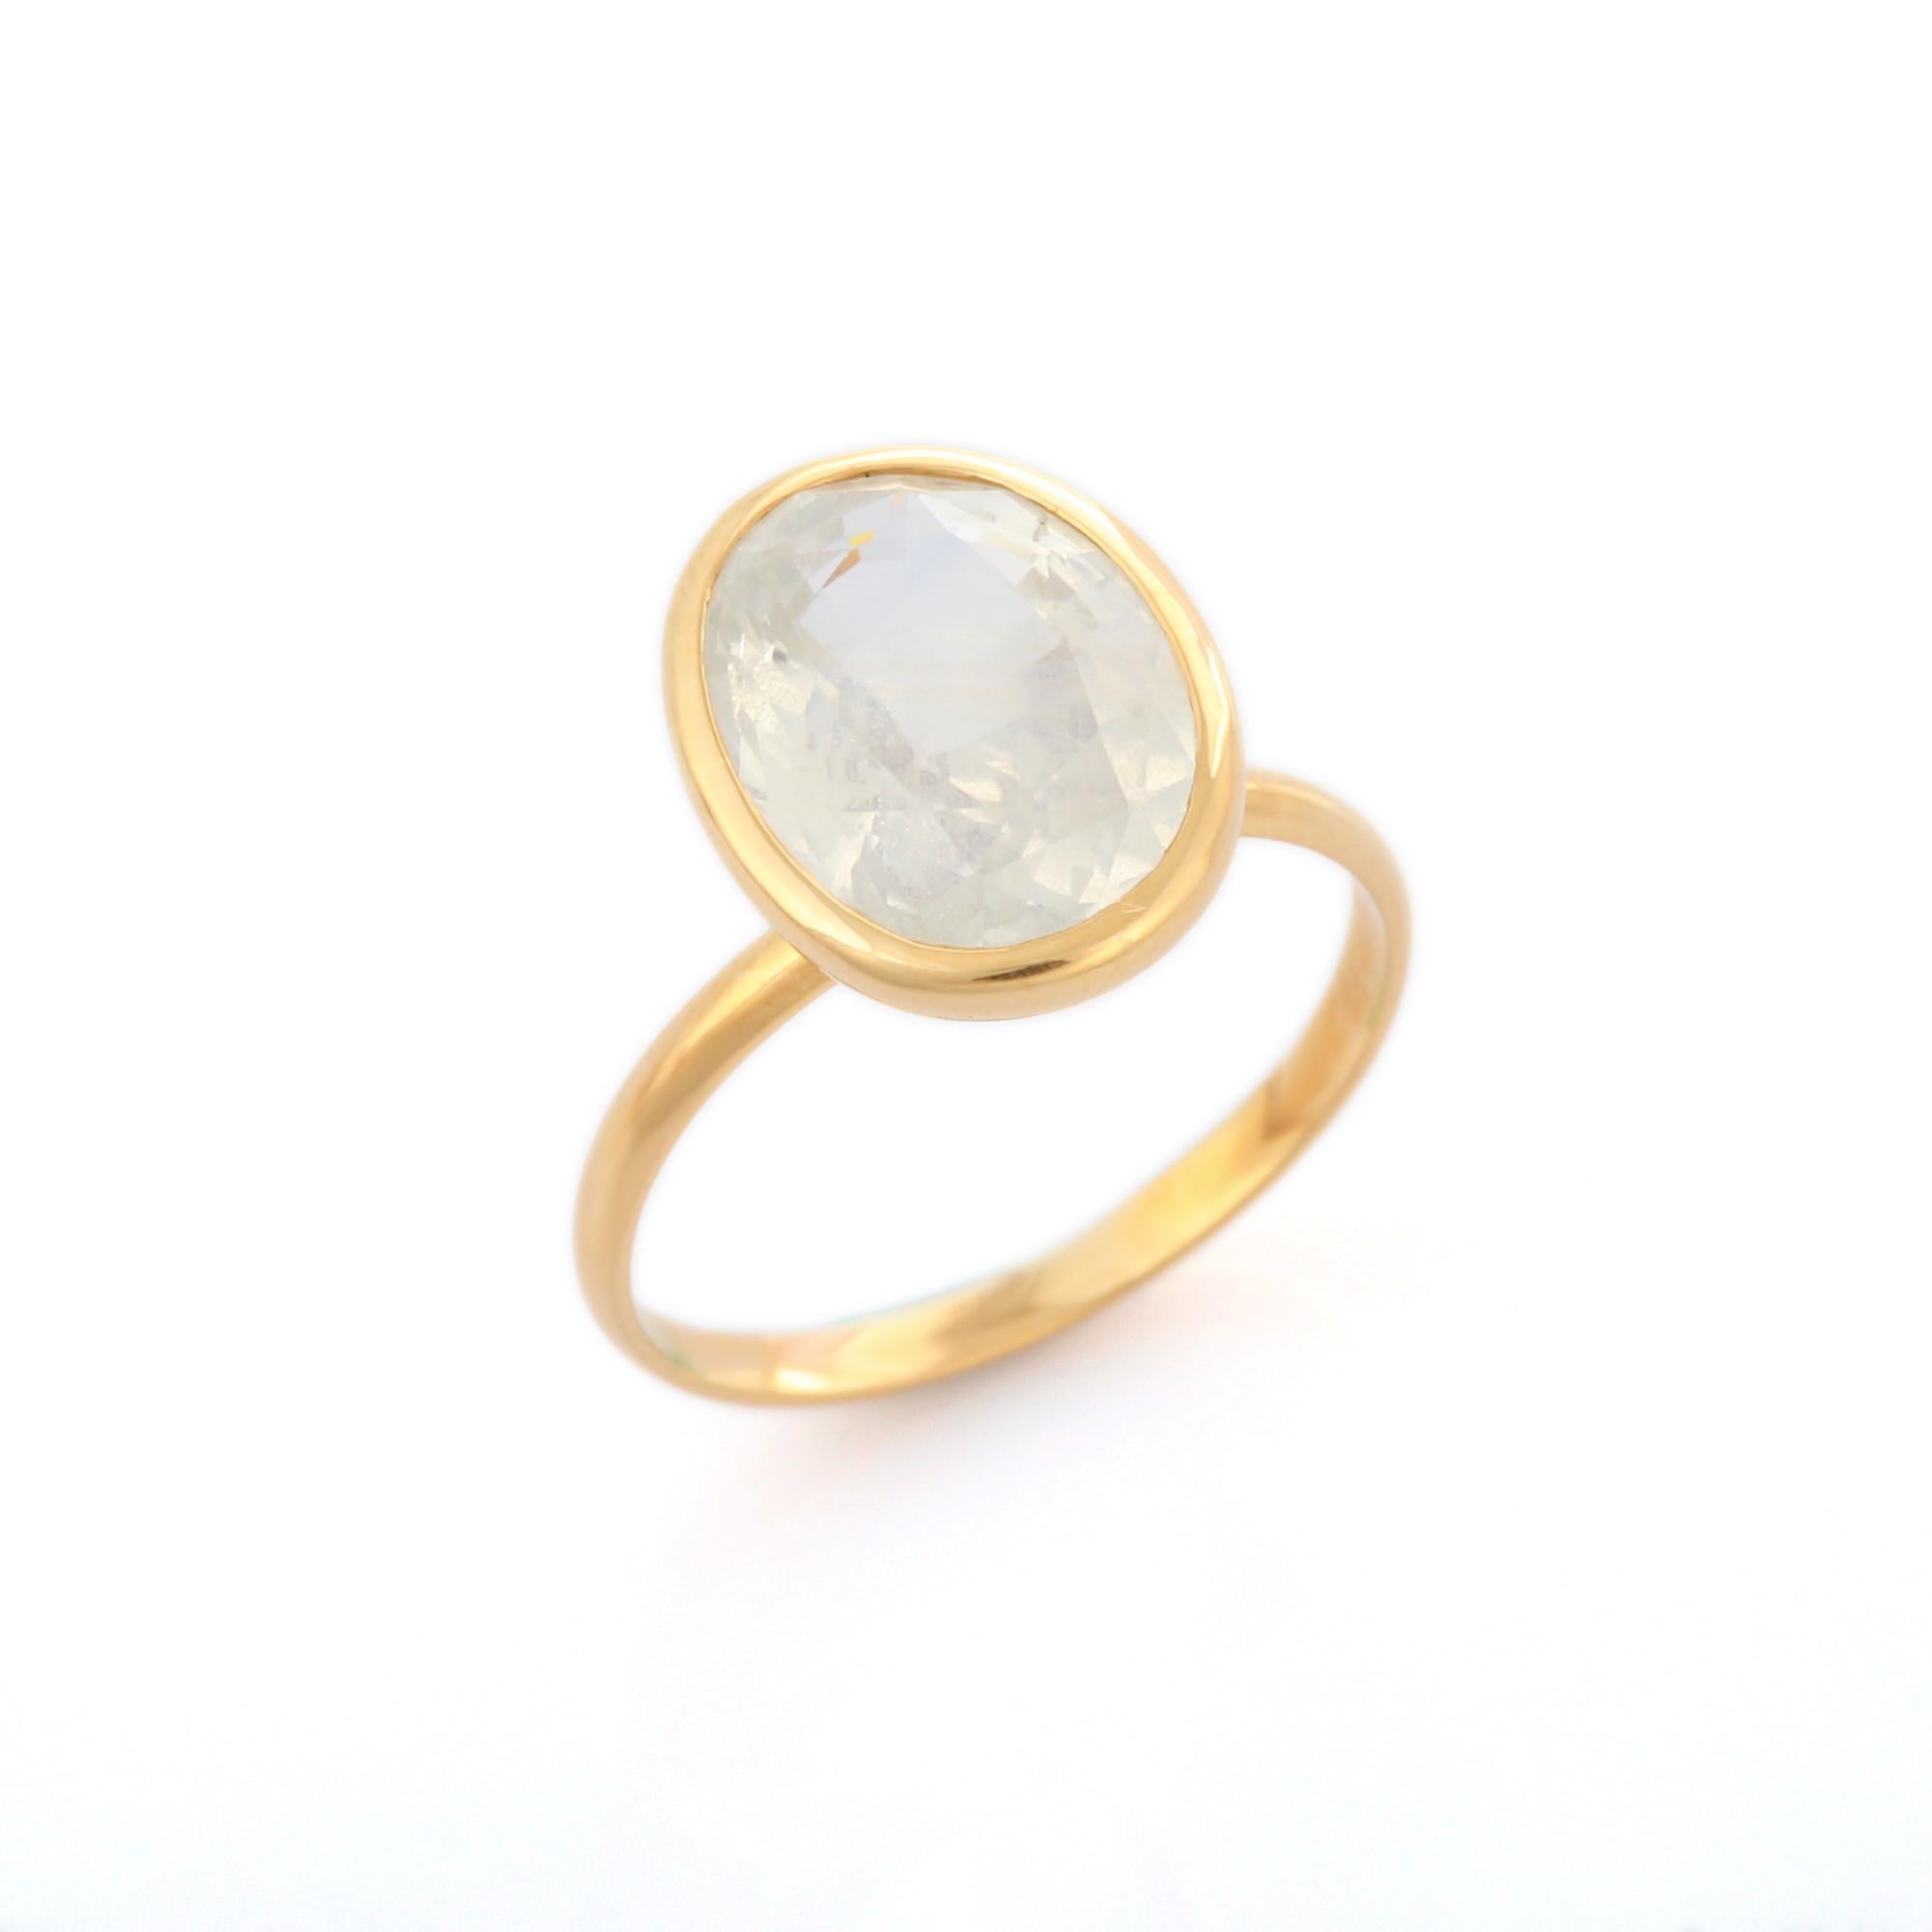 Oval Cut White Sapphire Cocktail Ring in 18K Yellow Gold 4